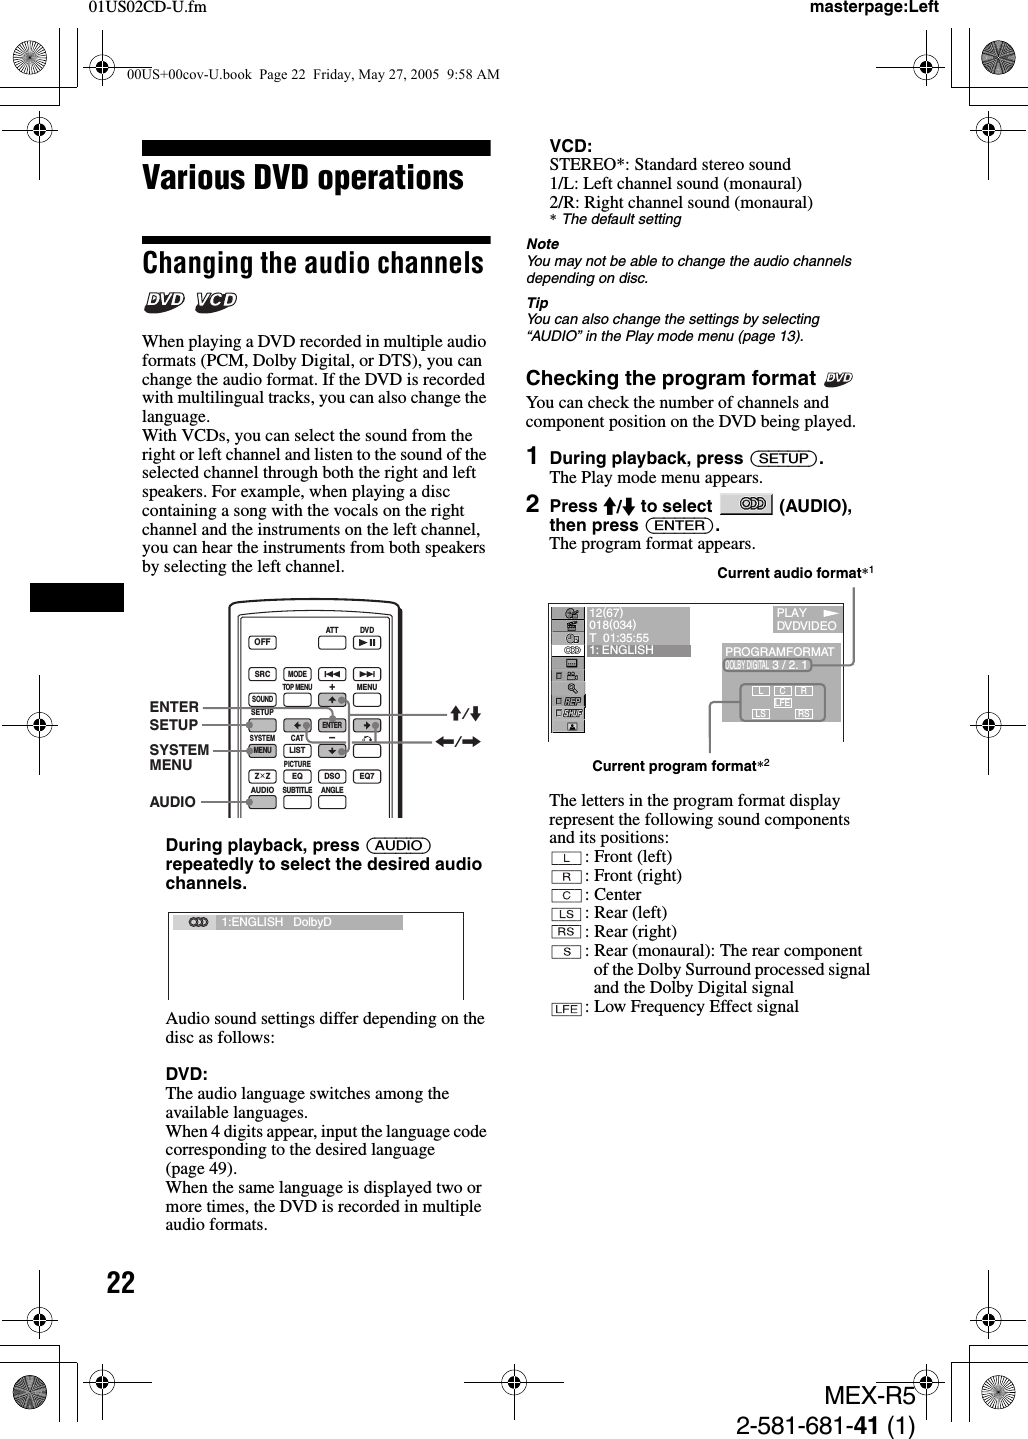 2201US02CD-U.fmMEX-R52-581-681-41 (1)masterpage:LeftVarious DVD operationsChanging the audio channels  When playing a DVD recorded in multiple audio formats (PCM, Dolby Digital, or DTS), you can change the audio format. If the DVD is recorded with multilingual tracks, you can also change the language.With VCDs, you can select the sound from the right or left channel and listen to the sound of the selected channel through both the right and left speakers. For example, when playing a disc containing a song with the vocals on the right channel and the instruments on the left channel, you can hear the instruments from both speakers by selecting the left channel.During playback, press (AUDIO) repeatedly to select the desired audio channels.Audio sound settings differ depending on the disc as follows:DVD:The audio language switches among the available languages.When 4 digits appear, input the language code corresponding to the desired language (page 49).When the same language is displayed two or more times, the DVD is recorded in multiple audio formats.VCD:STEREO*: Standard stereo sound1/L: Left channel sound (monaural)2/R: Right channel sound (monaural)*The default settingNoteYou may not be able to change the audio channels depending on disc.TipYou can also change the settings by selecting “AUDIO” in the Play mode menu (page 13).Checking the program format You can check the number of channels and component position on the DVD being played.1During playback, press (SETUP).The Play mode menu appears.2Press M/m to select   (AUDIO), then press (ENTER).The program format appears.The letters in the program format display represent the following sound components and its positions:: Front (left): Front (right): Center: Rear (left): Rear (right): Rear (monaural): The rear component of the Dolby Surround processed signal and the Dolby Digital signal : Low Frequency Effect signalSRCMODEATT DVDSOUNDTOP MENUMENUSETUPENTERSYSTEMMENUCATEQLISTZ × Z DSO EQ7PICTUREAUDIOSUBTITLEANGLEOFF+–SETUP M/mAUDIOSYSTEMMENUENTER&lt;/,1:ENGLISH   DolbyDL CLFELSRRS12(67)018(034)T  01:35:551: ENGLISH PROGRAMFORMATDOLBY DIGITAL 3 / 2. 1       PLAYDVDVIDEOCurrent audio format*1Current program format*200US+00cov-U.book  Page 22  Friday, May 27, 2005  9:58 AM